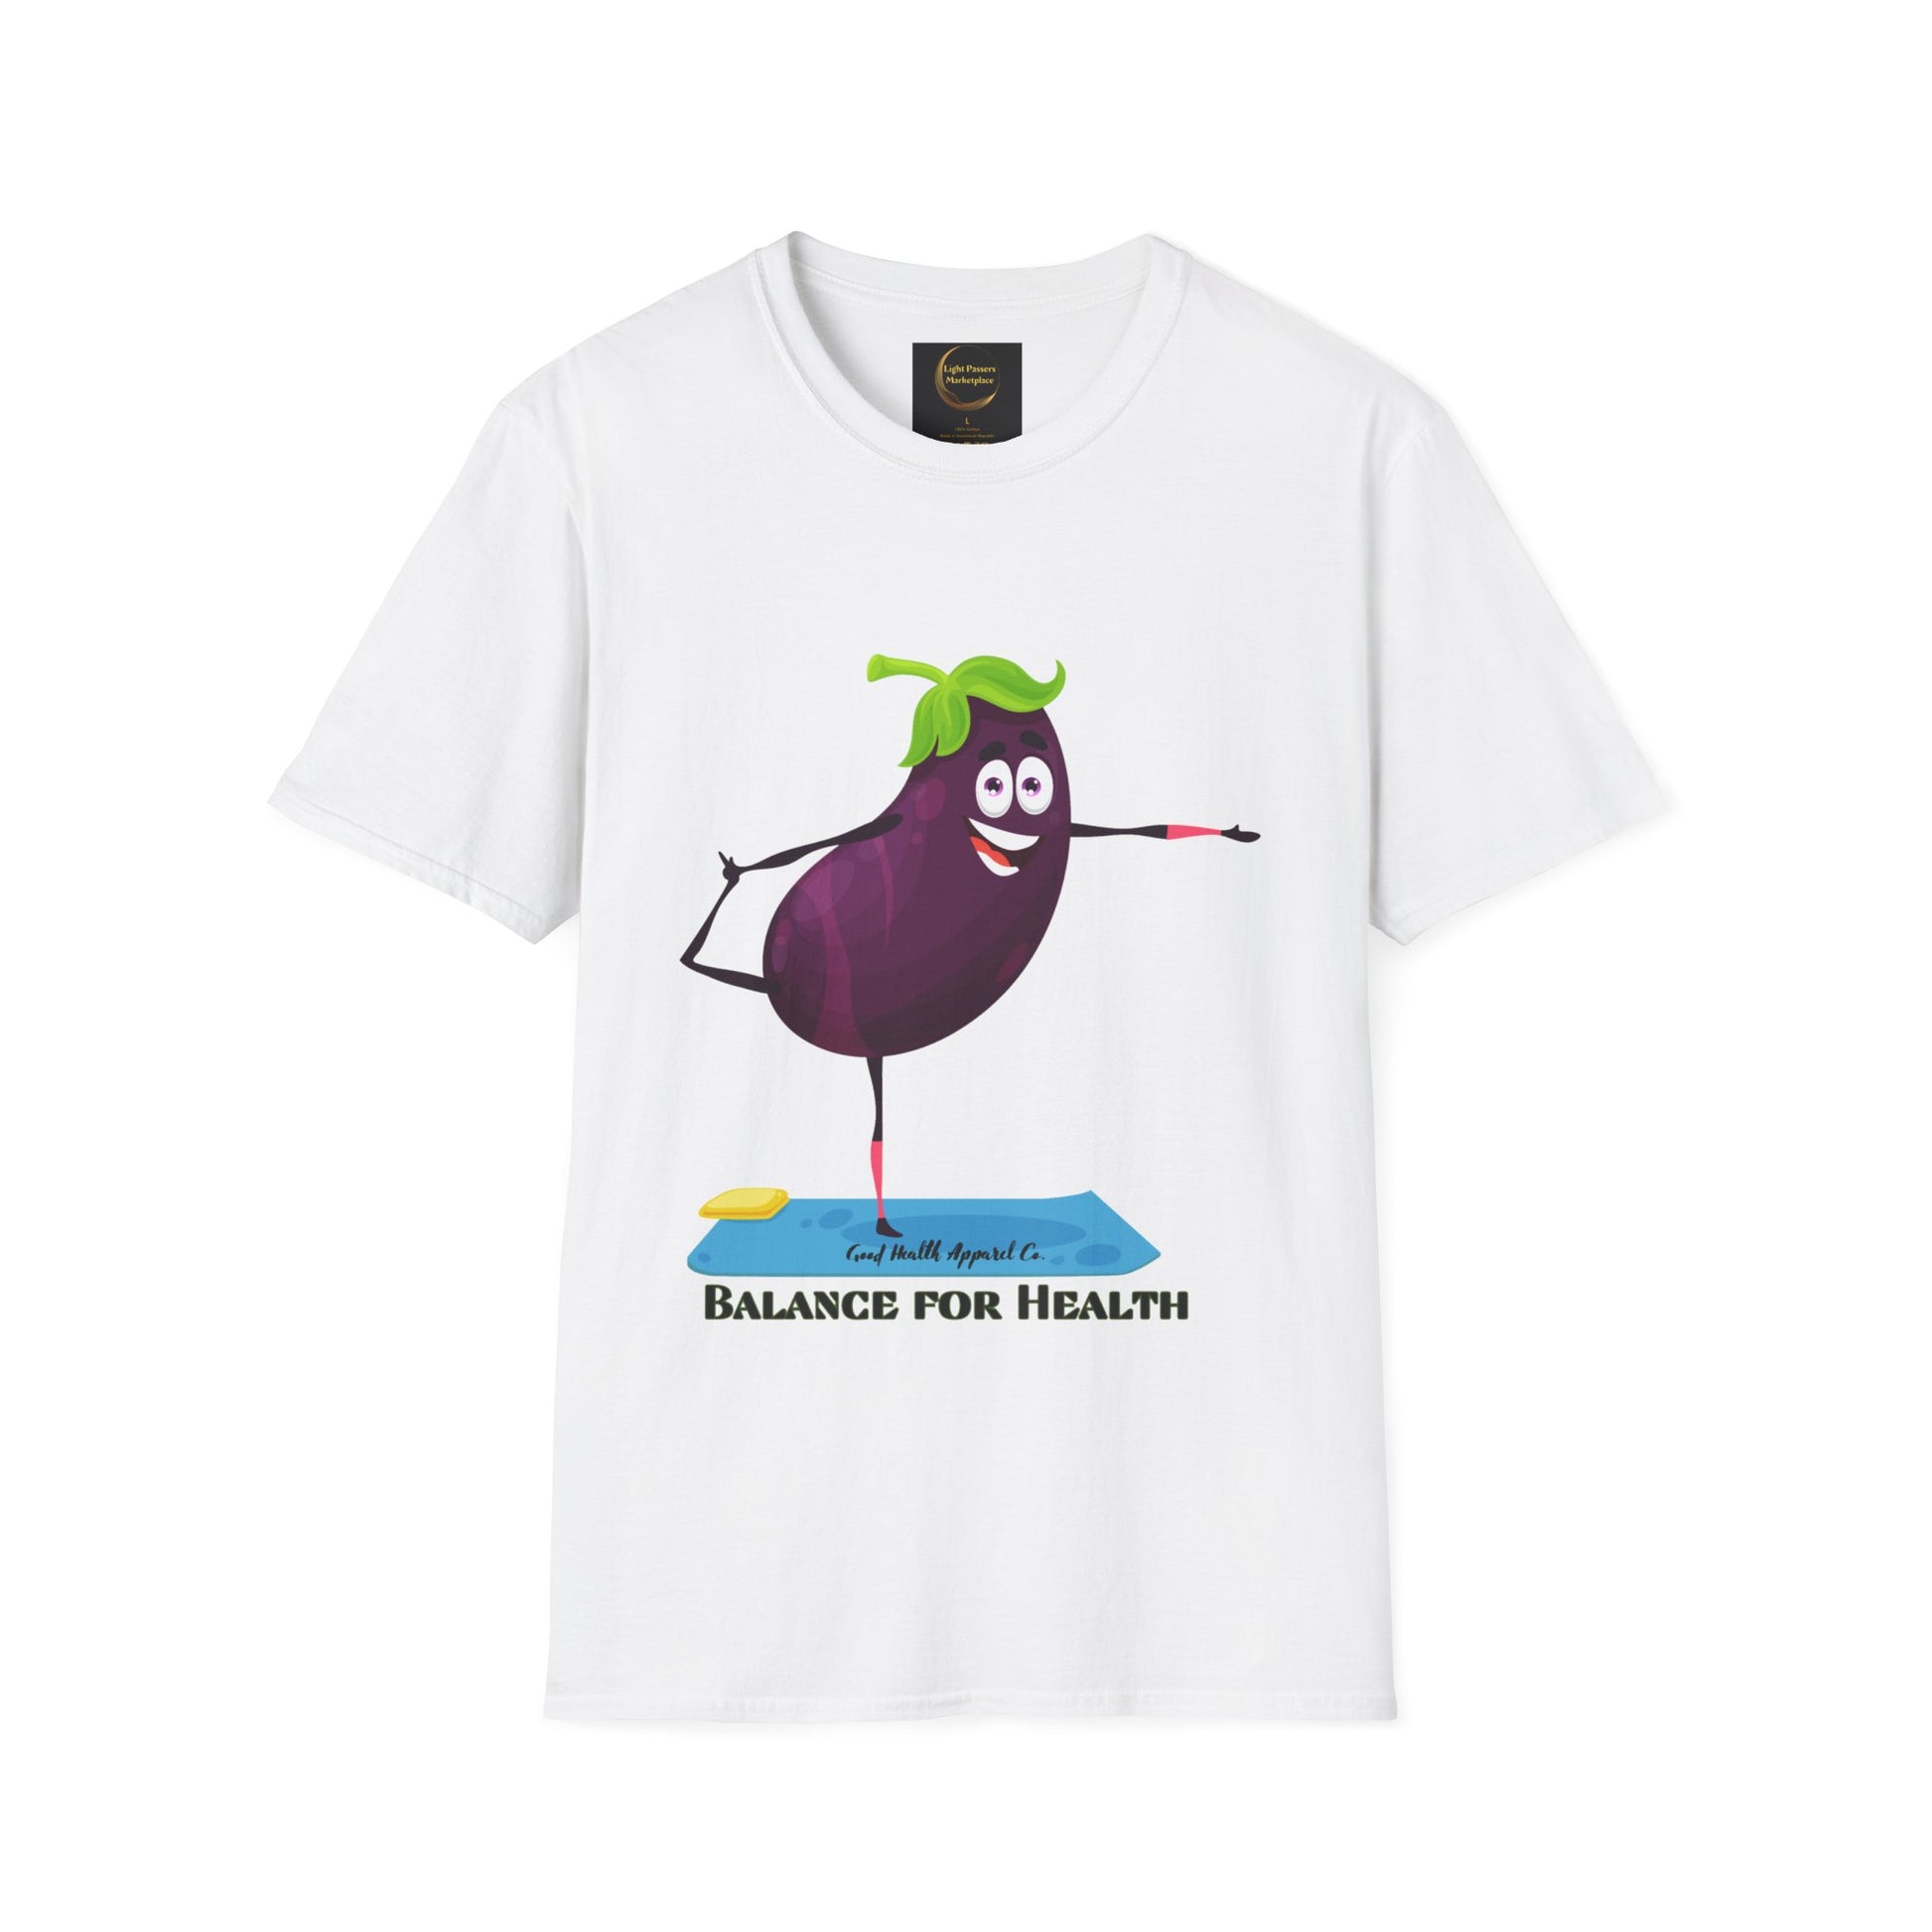 A white unisex t-shirt featuring a cartoon eggplant design, made of soft 100% cotton with twill tape shoulders, no side seams, and a ribbed collar. Ethically produced with ring-spun cotton.